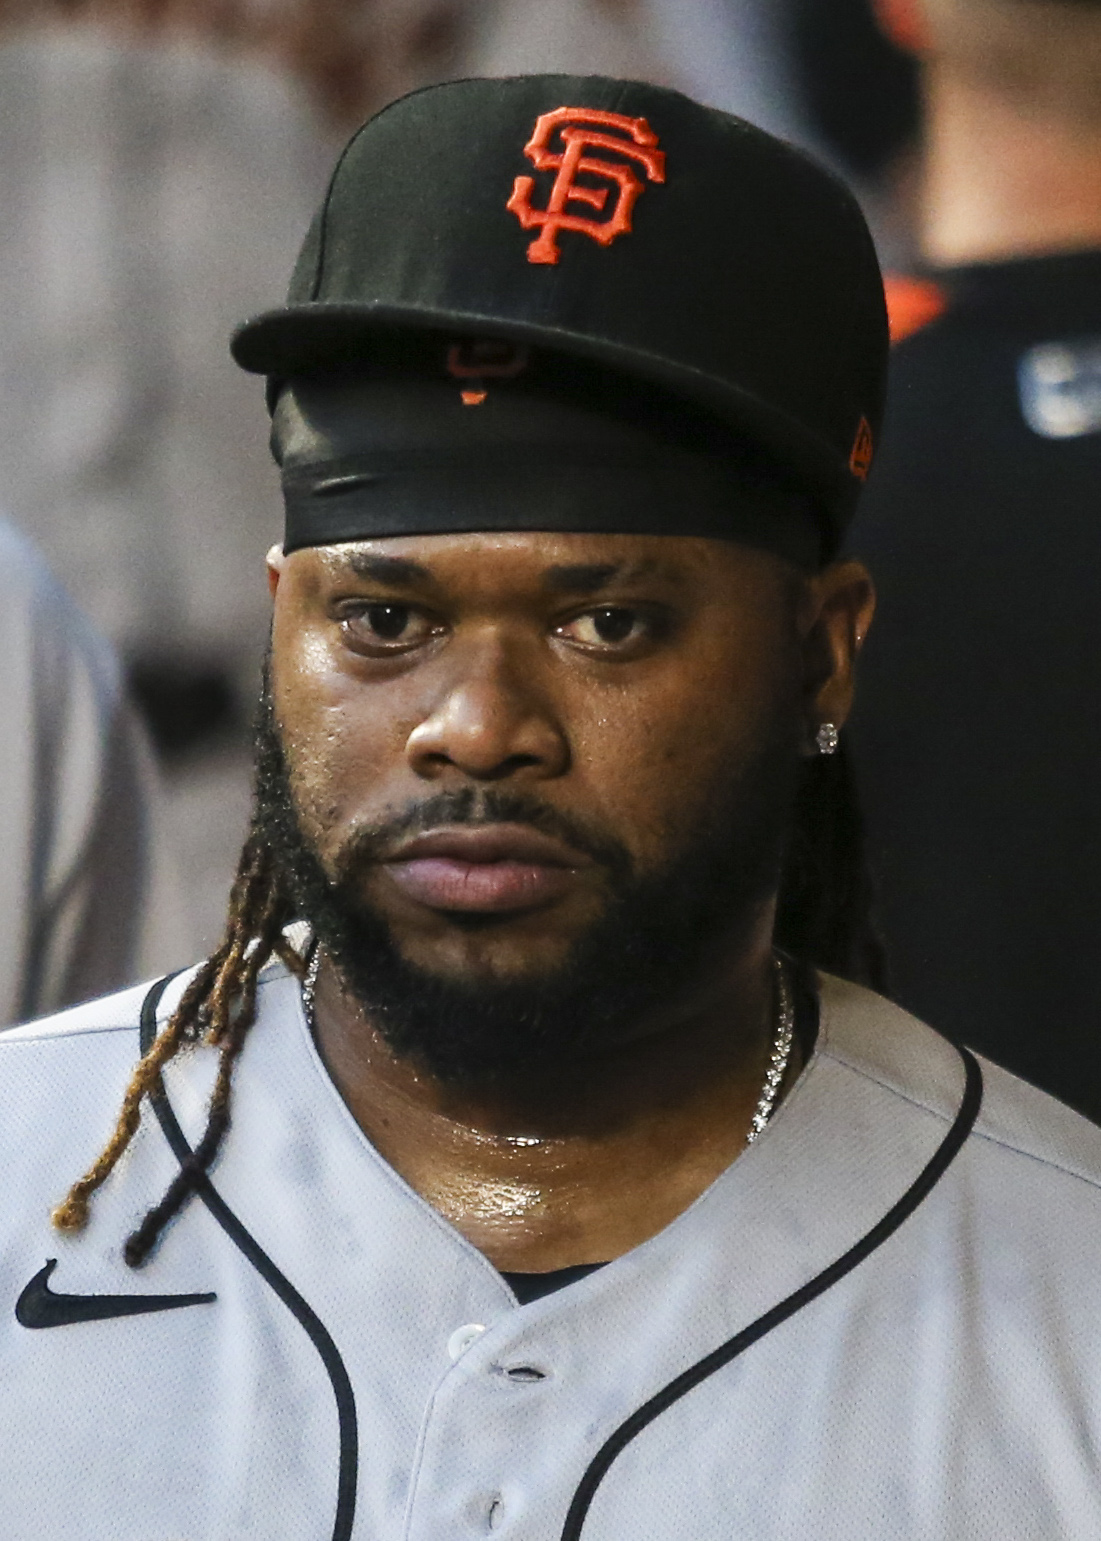 Reds face former ace Johnny Cueto in finale vs. Marlins